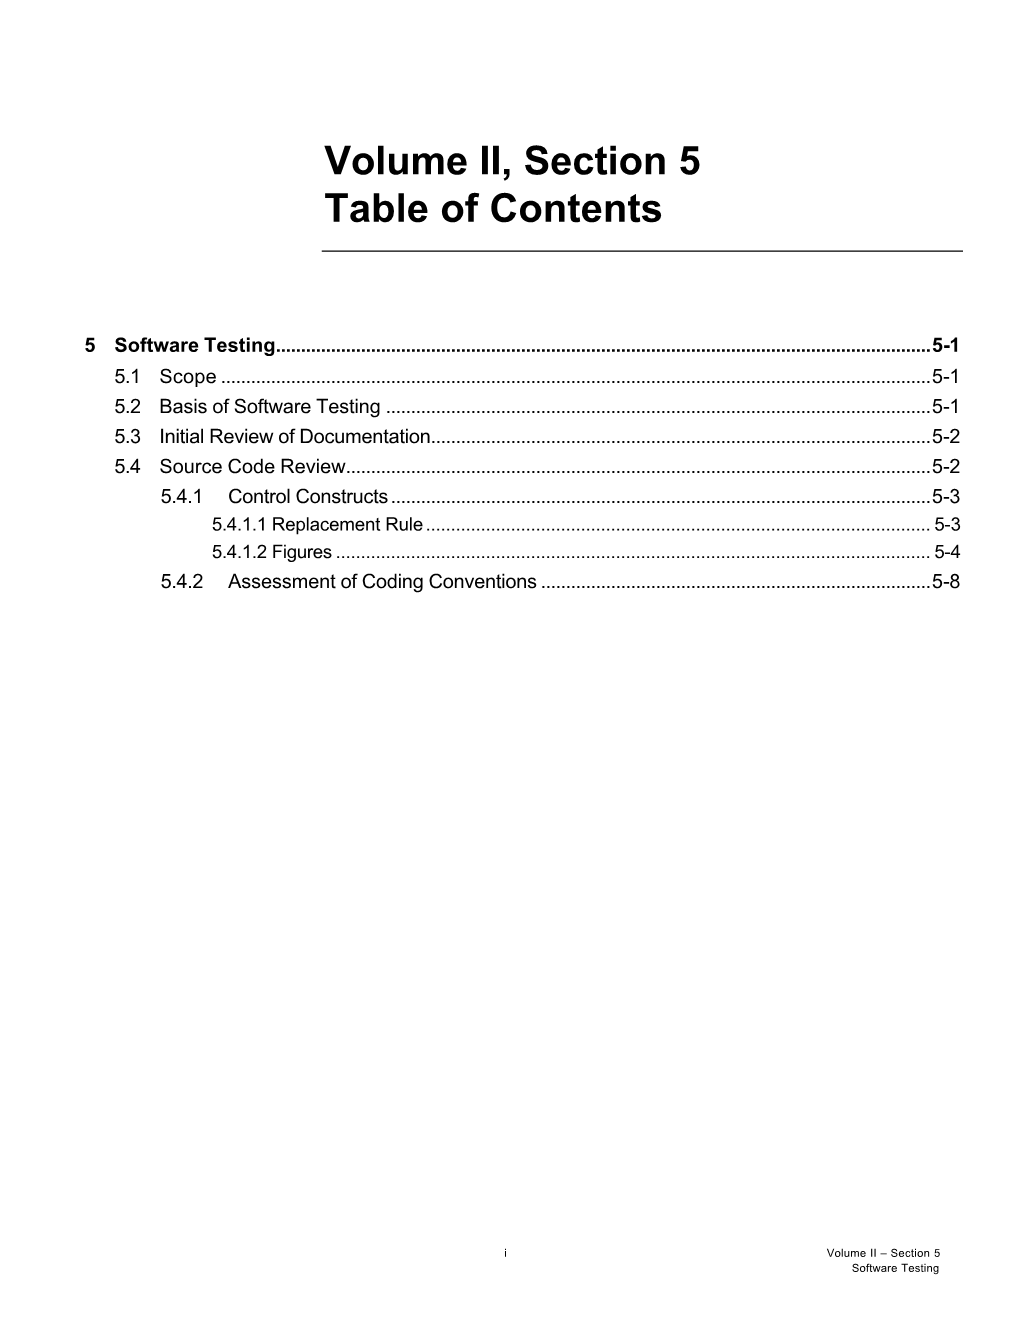 Volume II, Section 5 Table of Contents